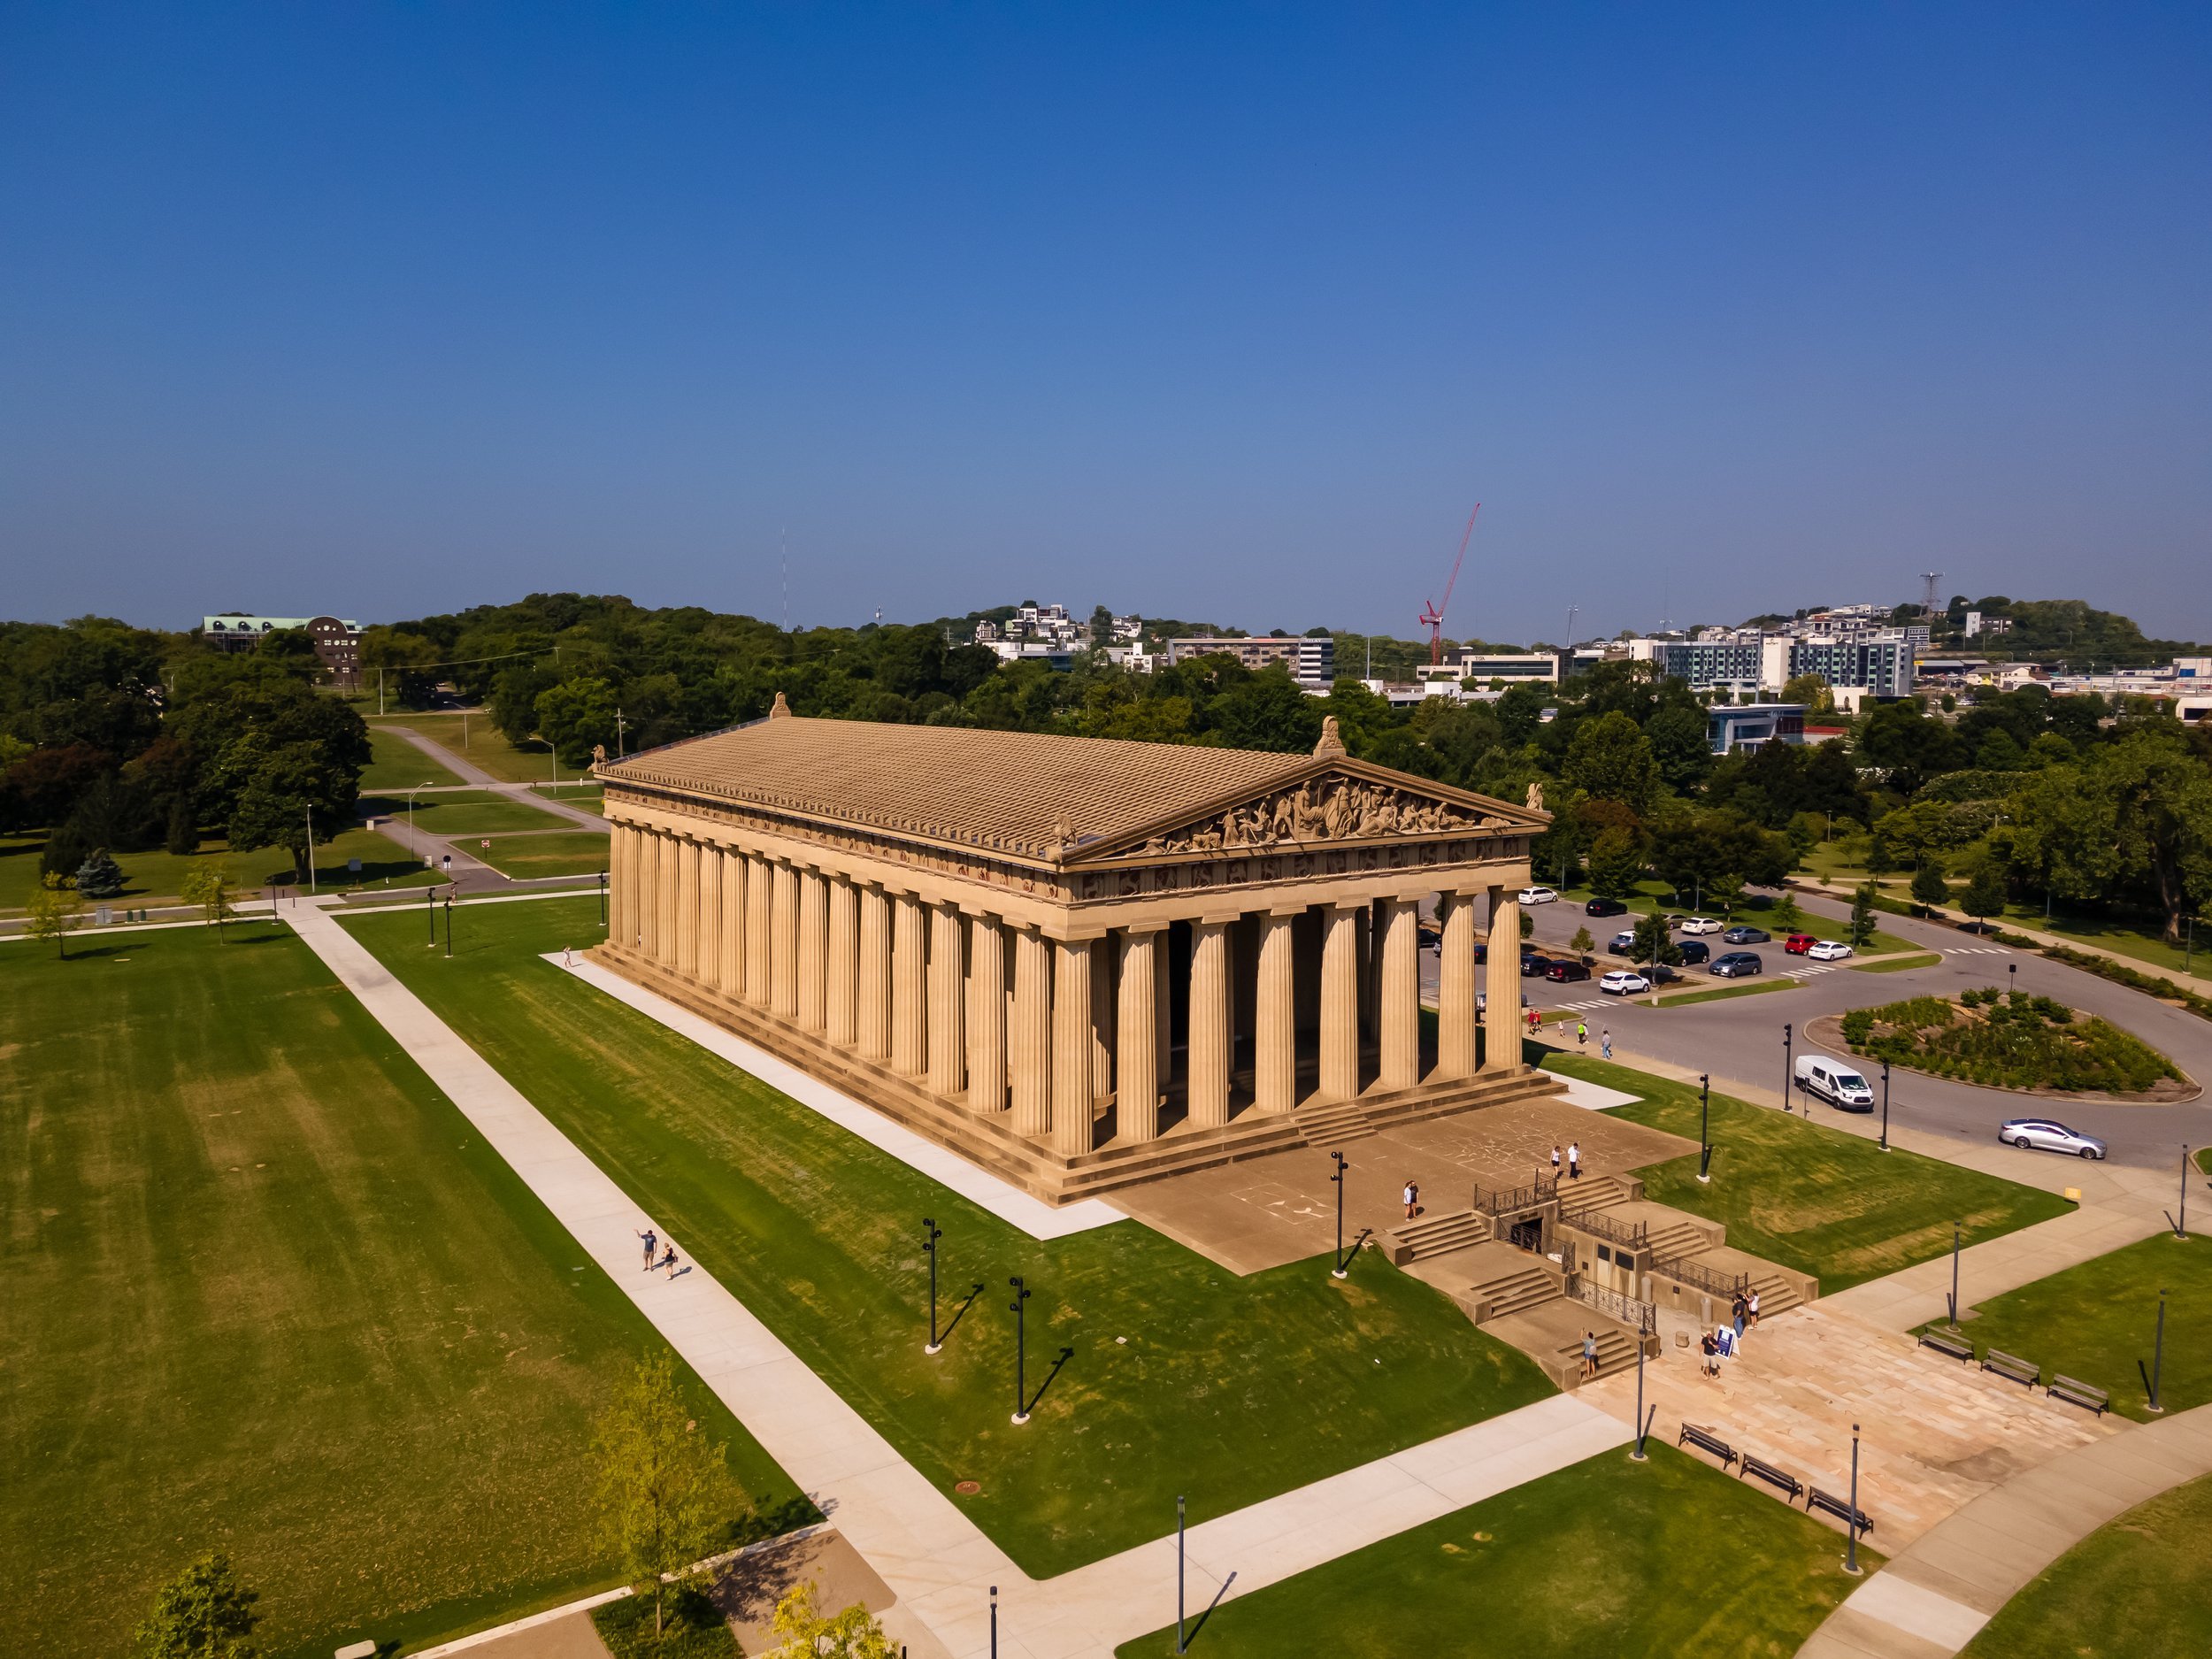 45 Unique things to do in Nashville Experiences You Won't Find Anywhere Else - The Parthenon: Nashville's Replica of Greek History